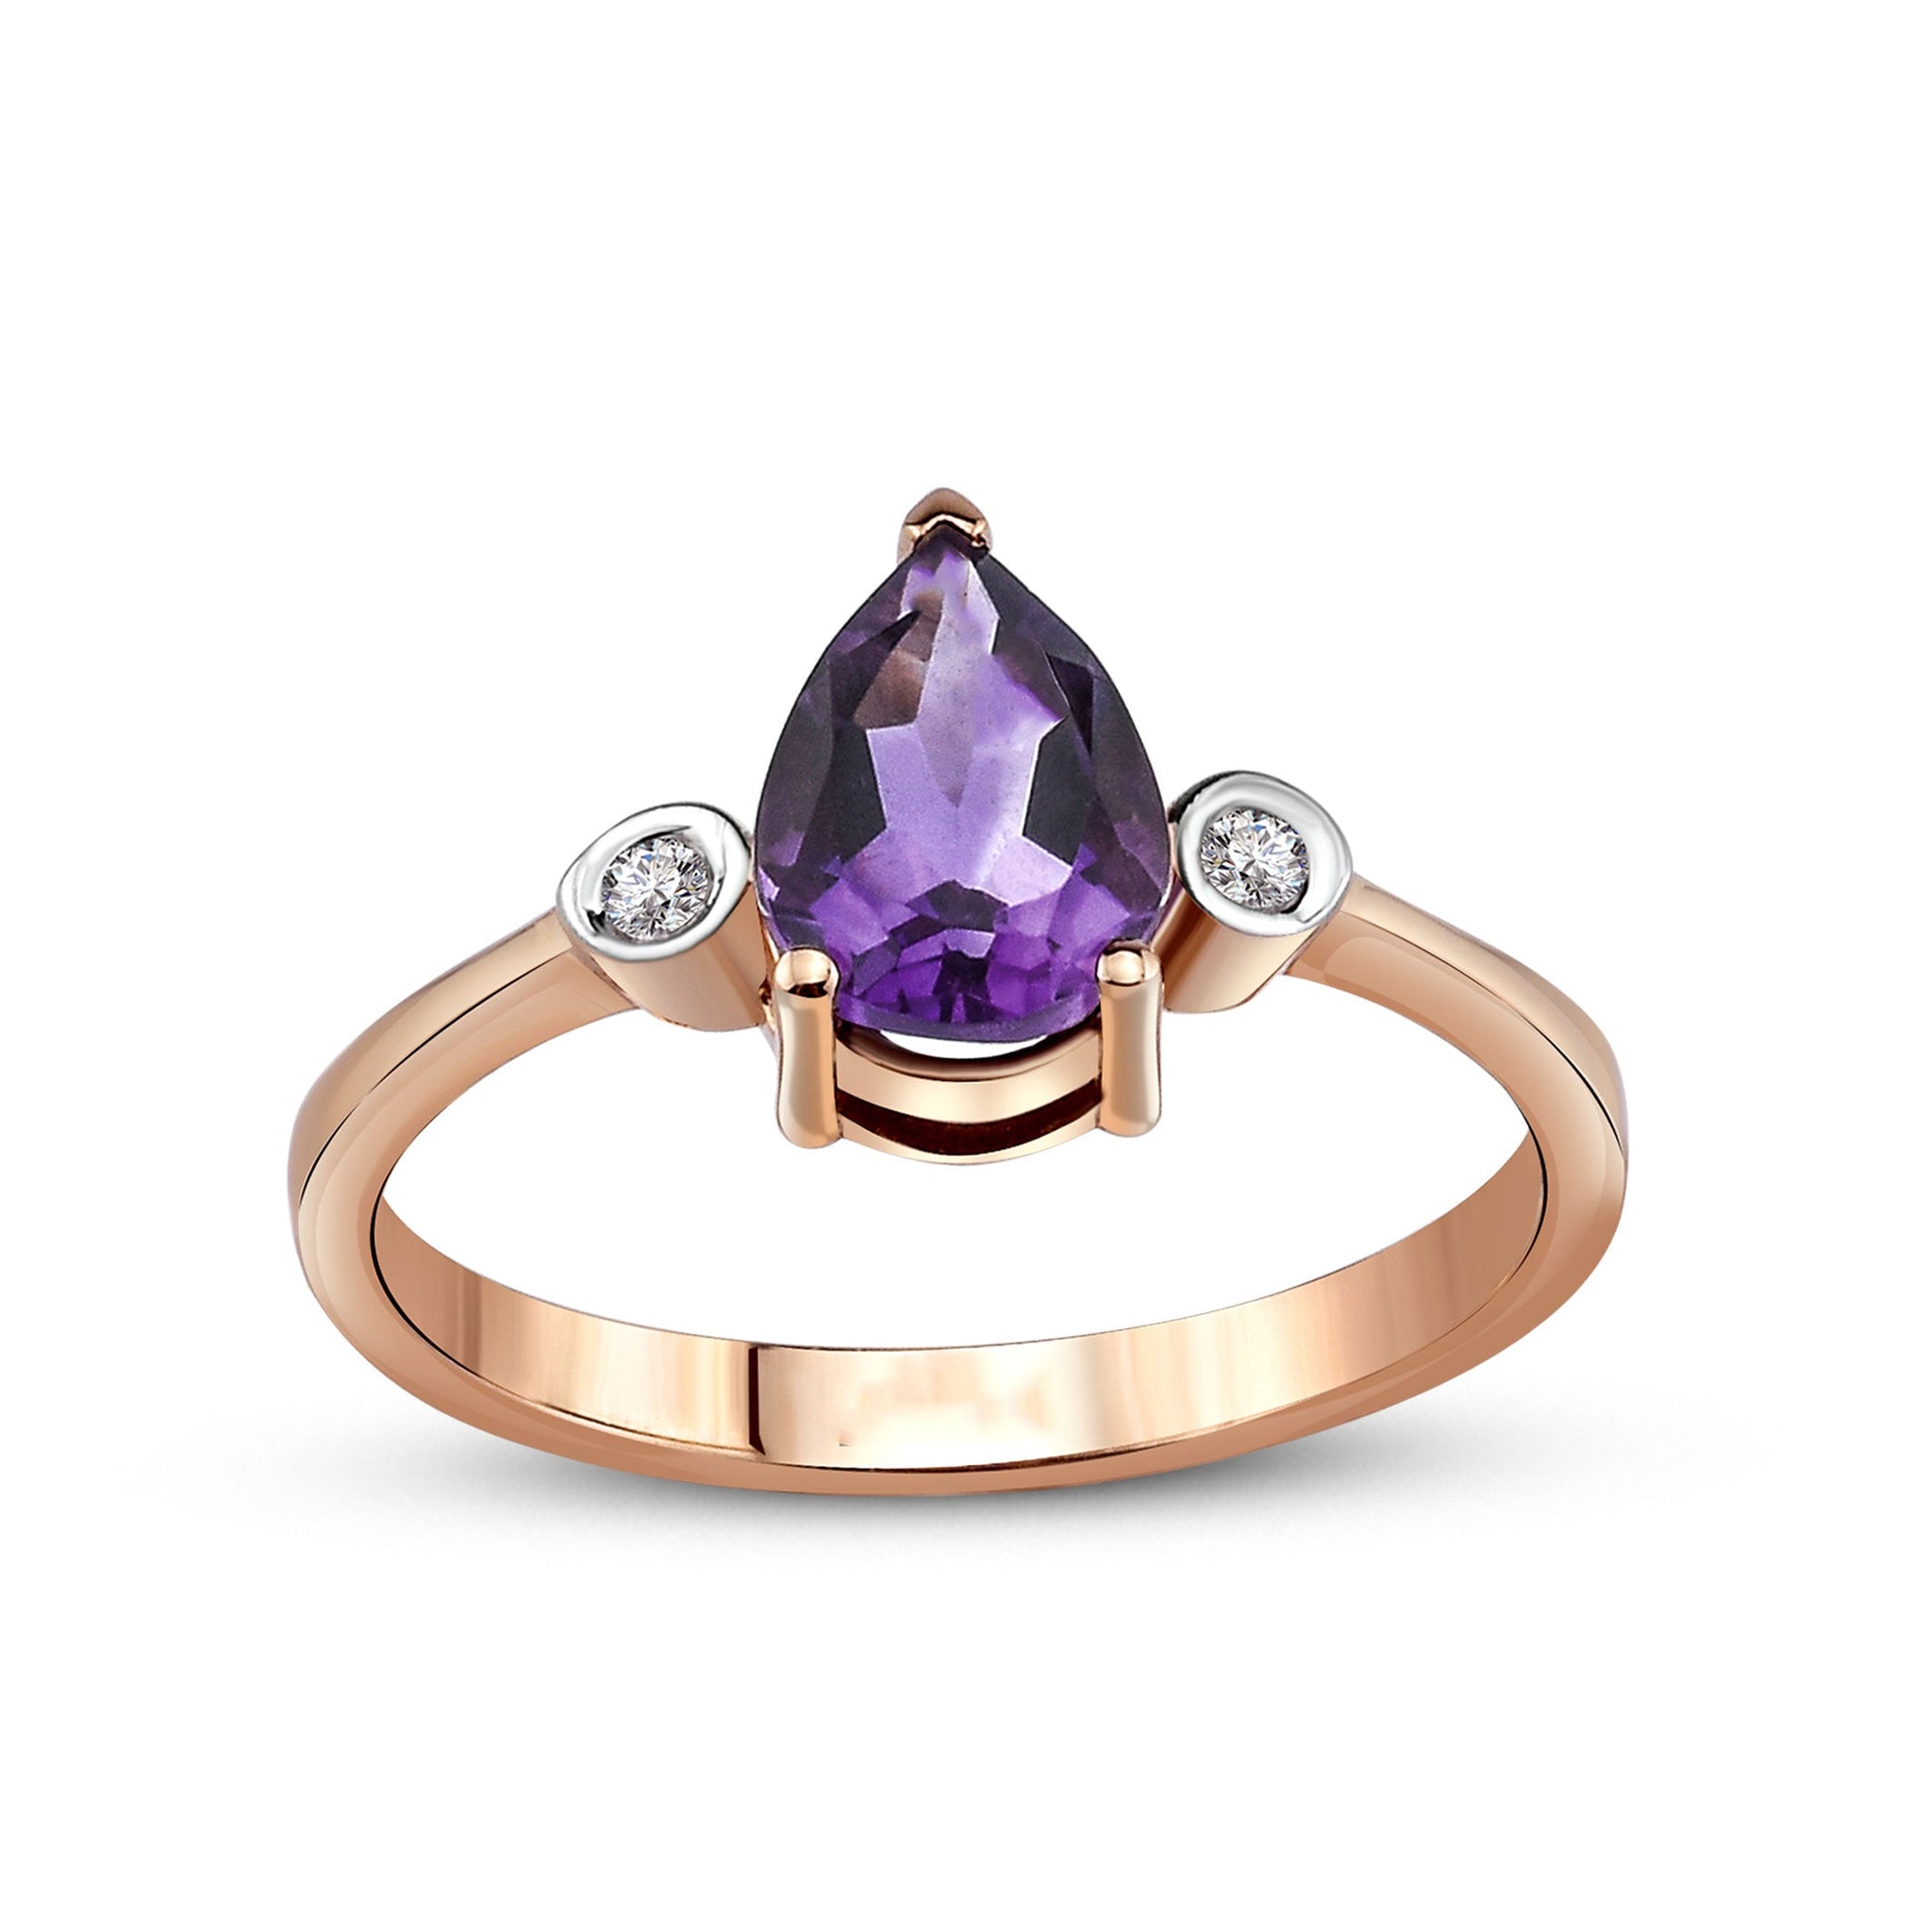  14K Yellow Gold Pear Amethyst Gemstone Ring - rings Shop online from Artisan Brands